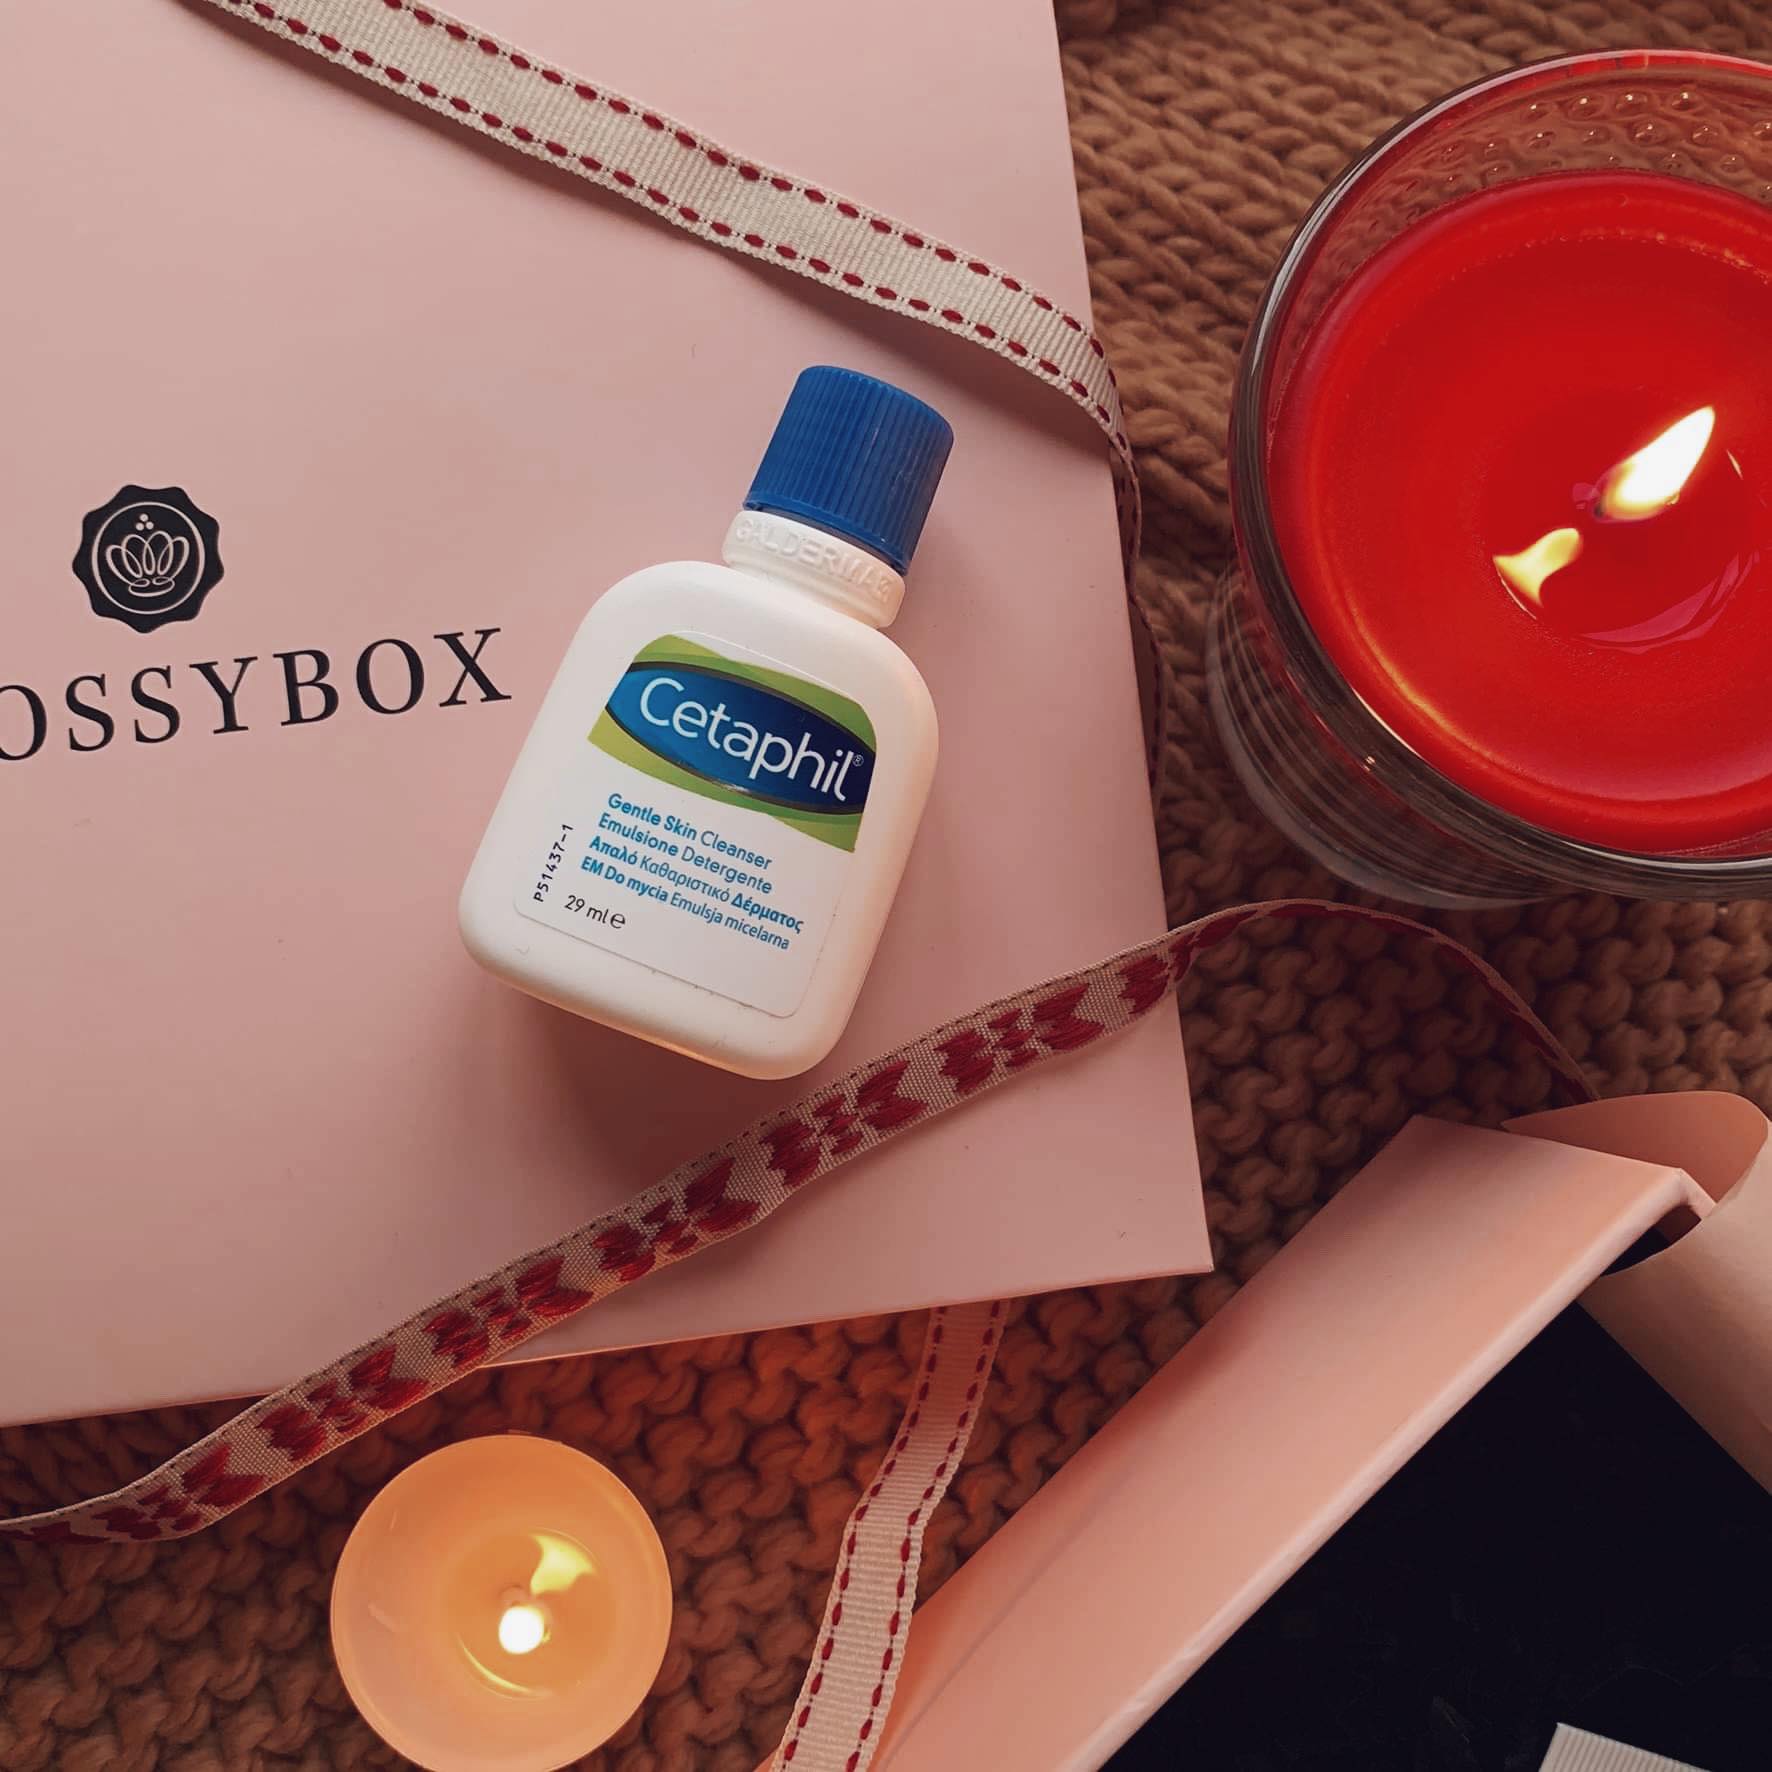 Cetaphil Gentle Skin Cleanser - November 2019 Glossybox Review - Miss Boux